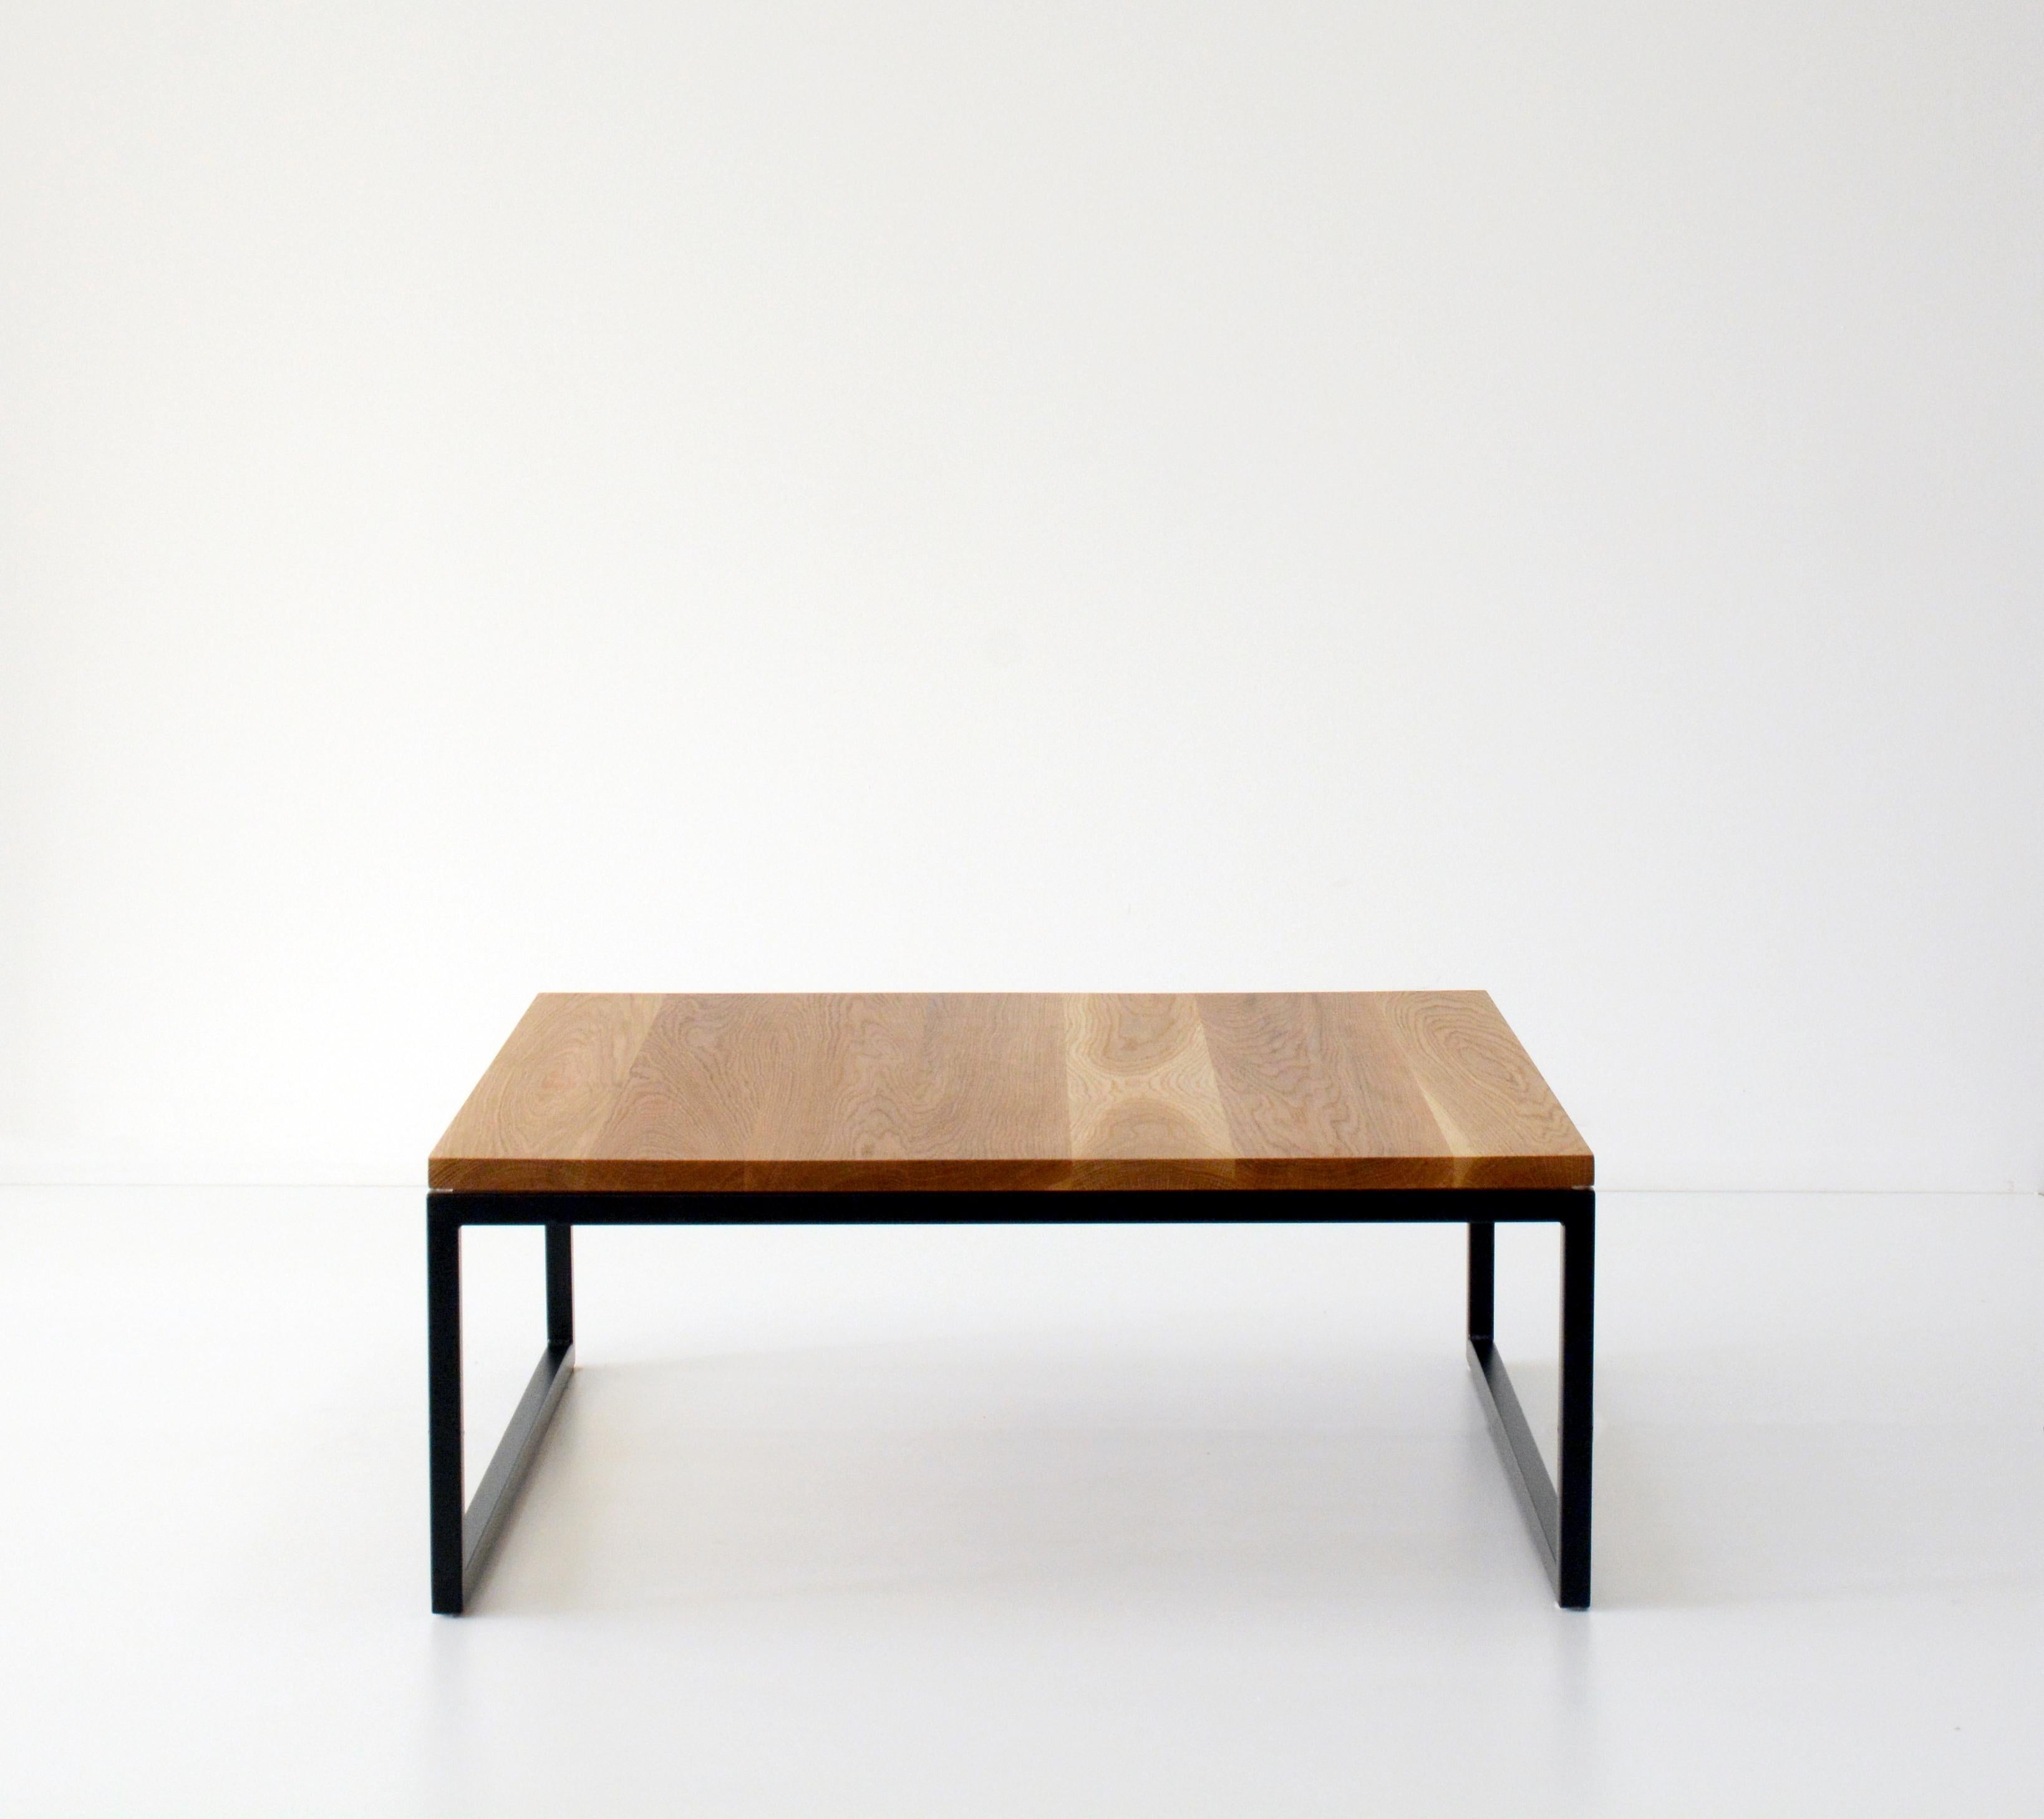 Walnut small fort york coffee table by Hollis & Morris
Dimensions: 36